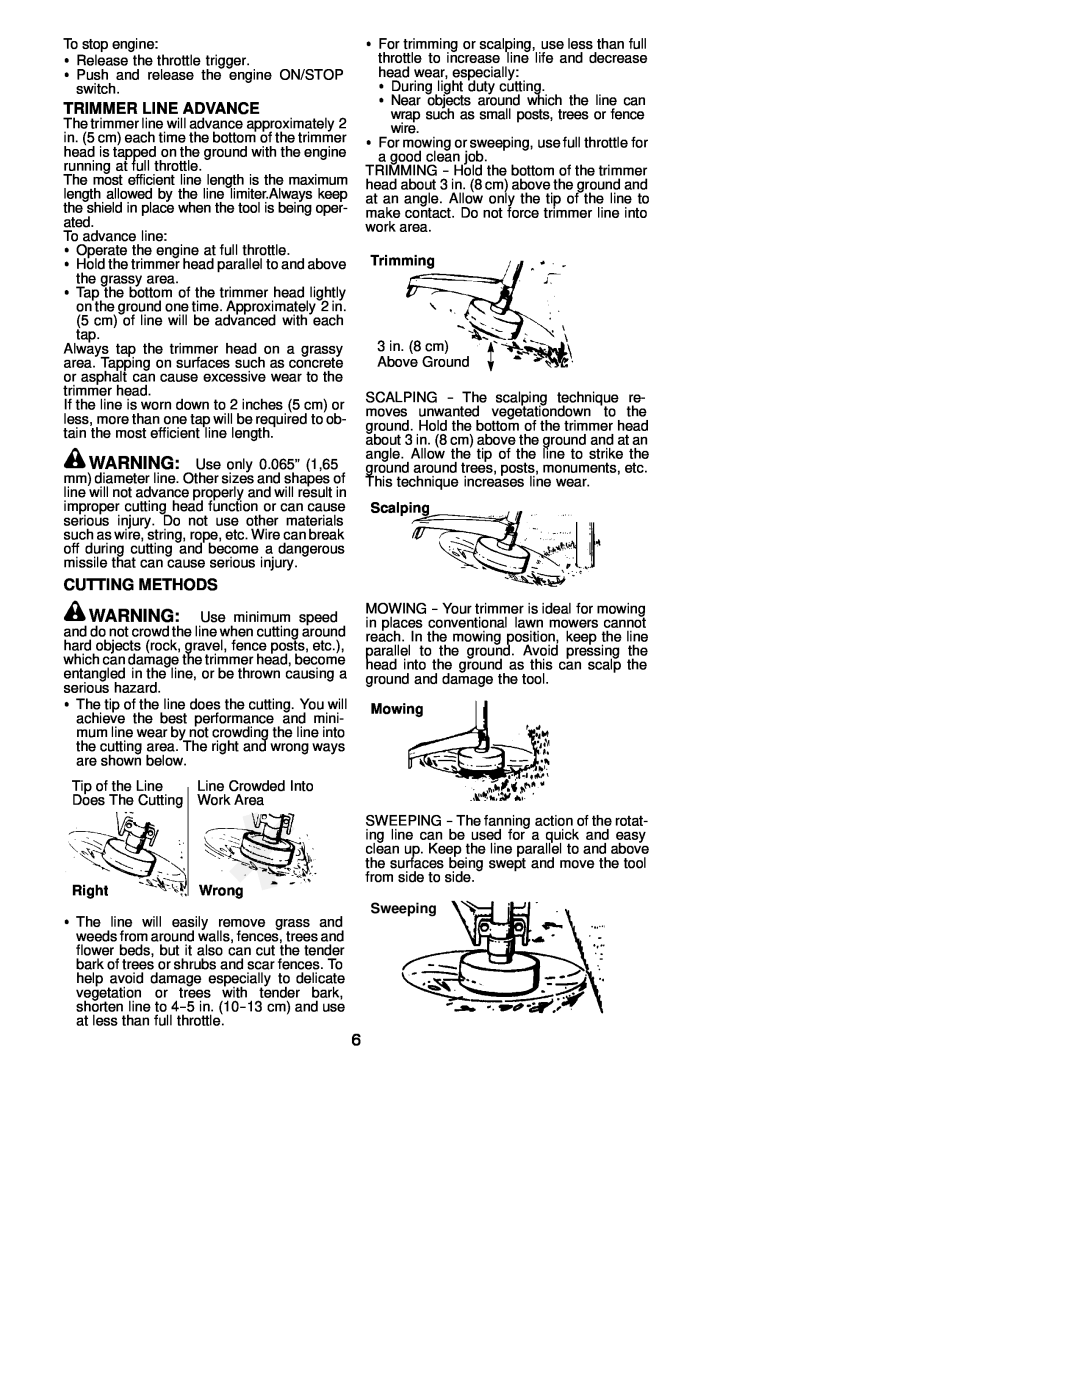 Weed Eater 530163363 instruction manual Trimmer Line Advance, Cutting Methods, Trimming, Scalping, Right, Mowing, Sweeping 